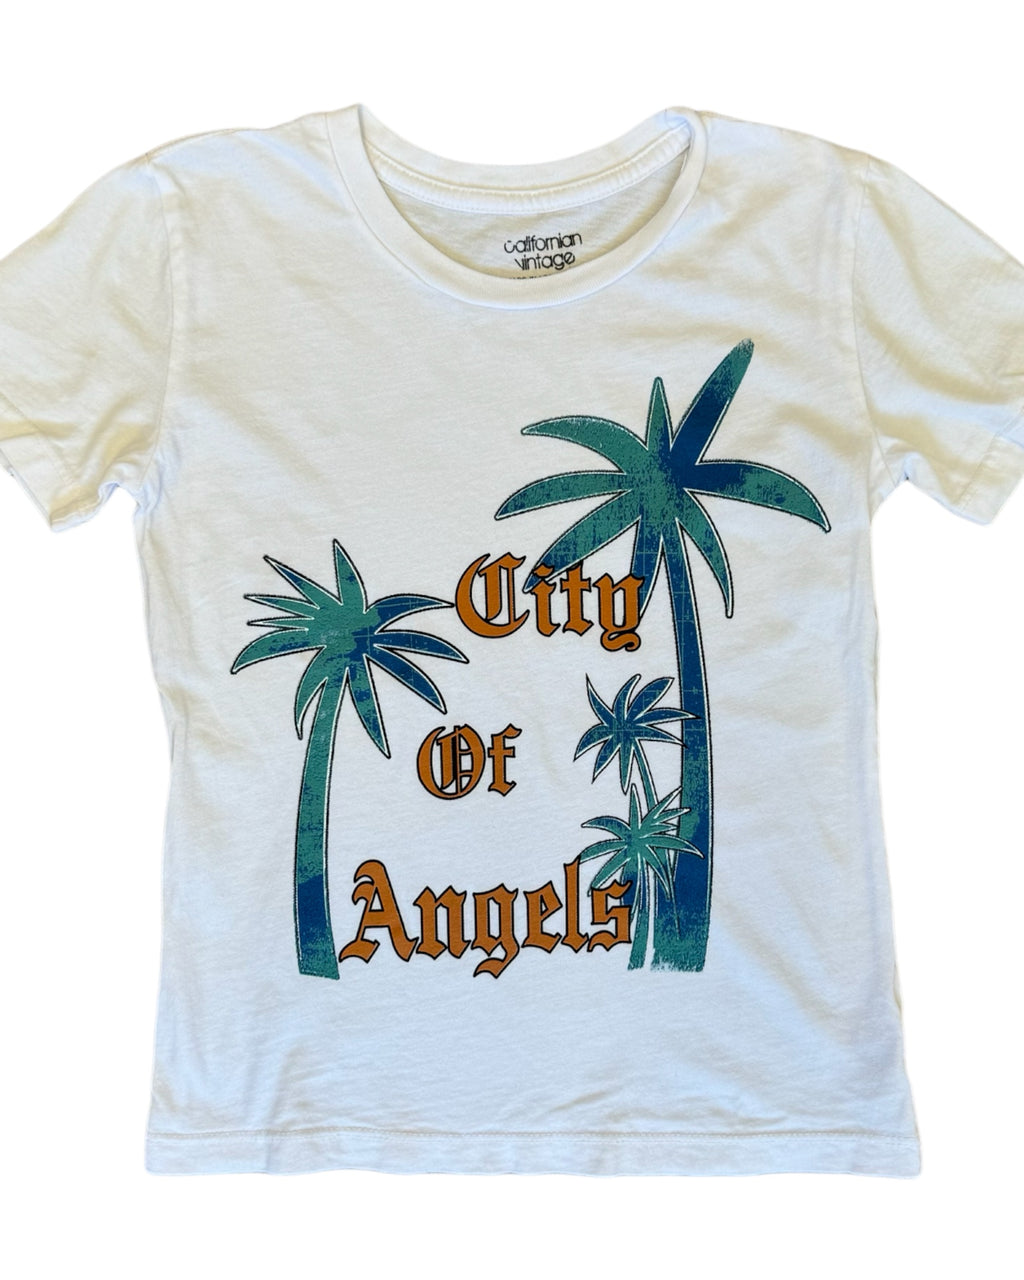 City of Angels Tee White